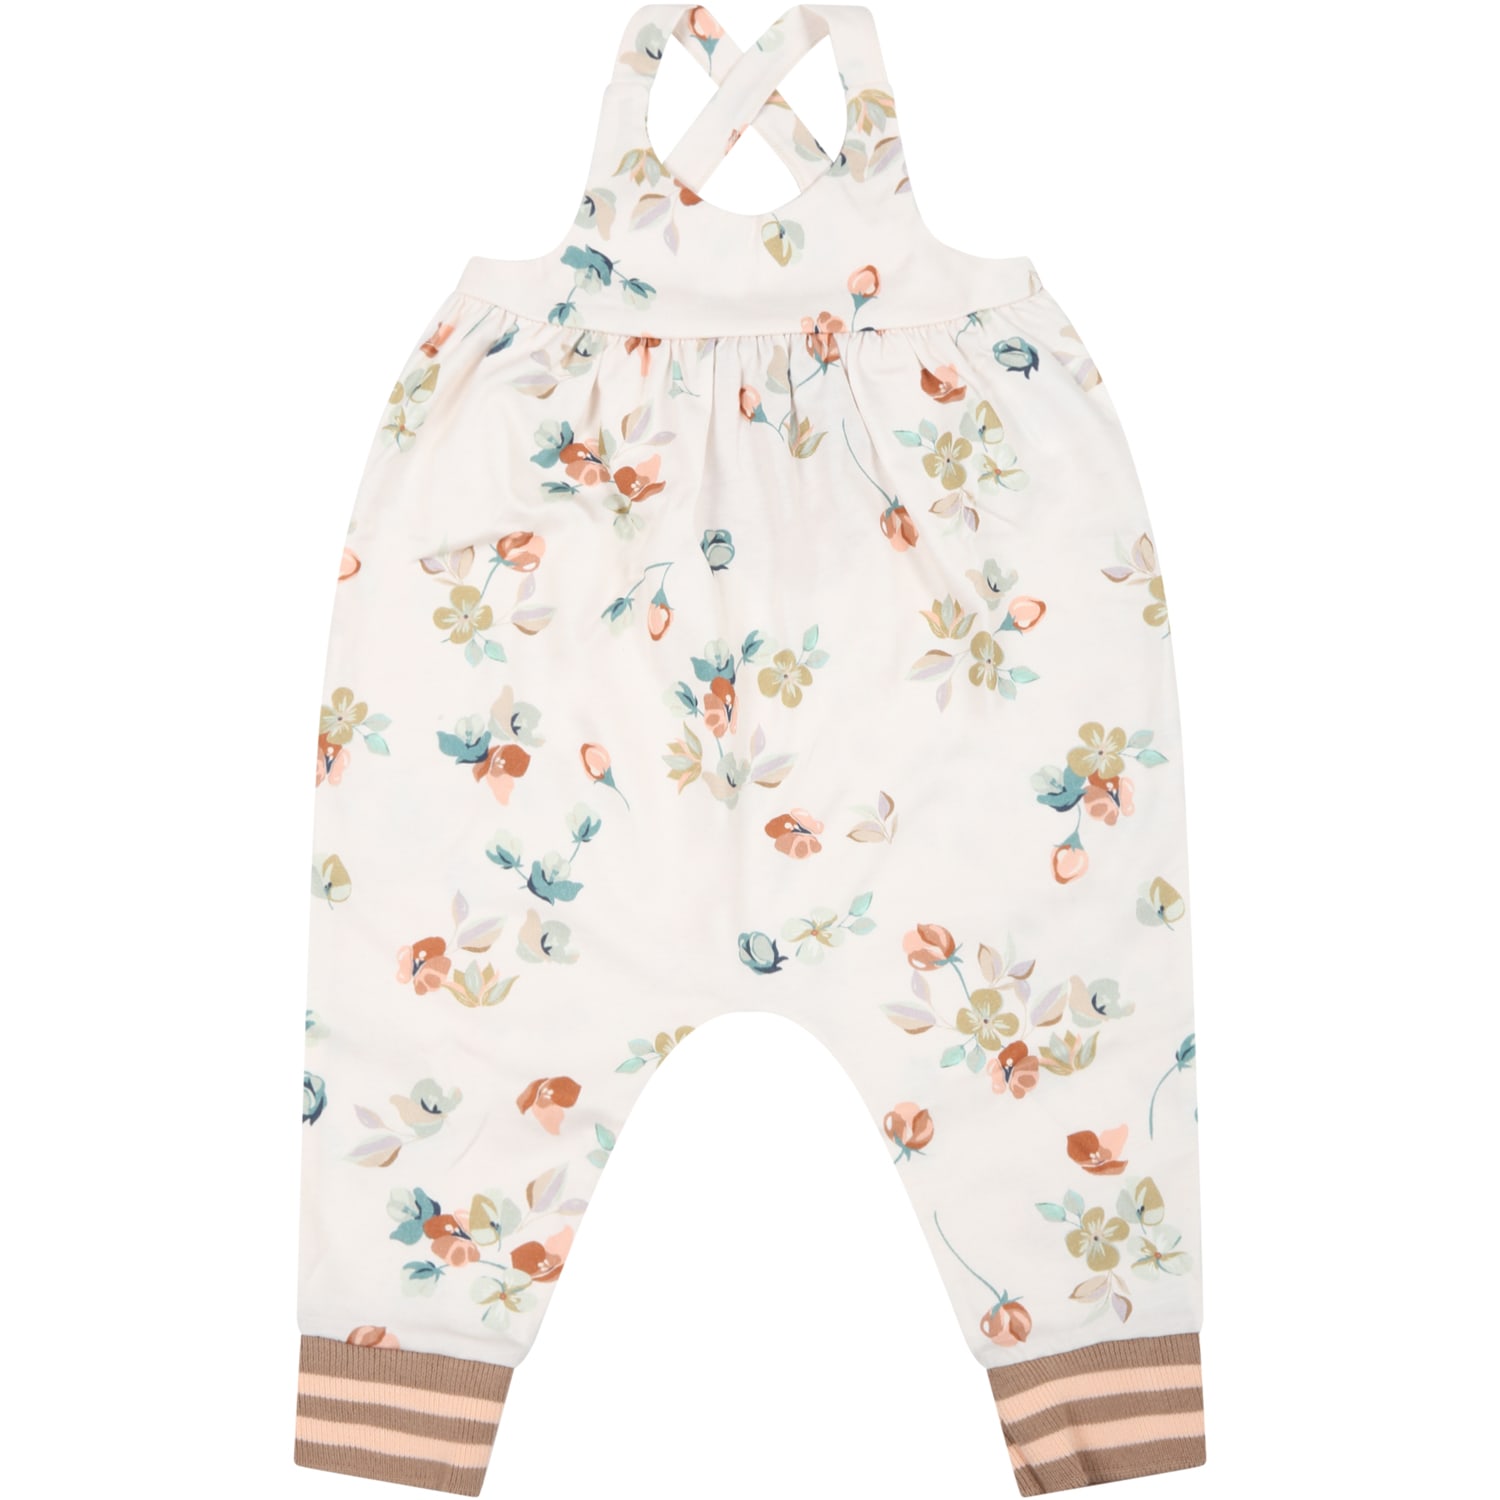 Coco Au Lait Pink Dungarees For Baby Girl With Colorful Flowers